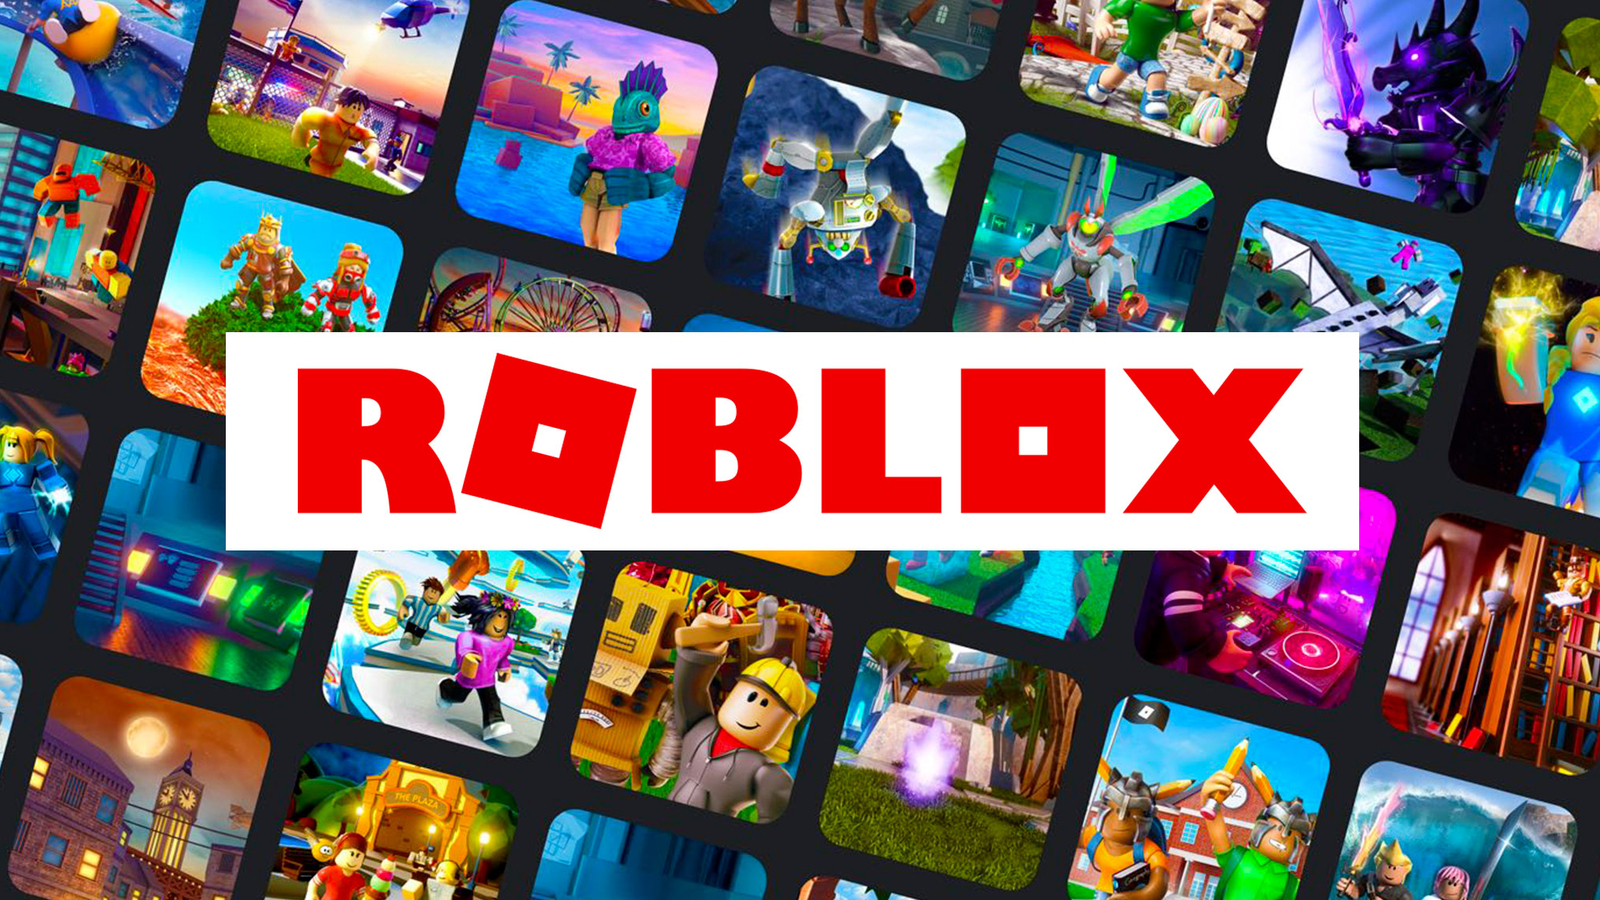 educational purposes only! #bloxflip #roblox #betting #challenge #fy #